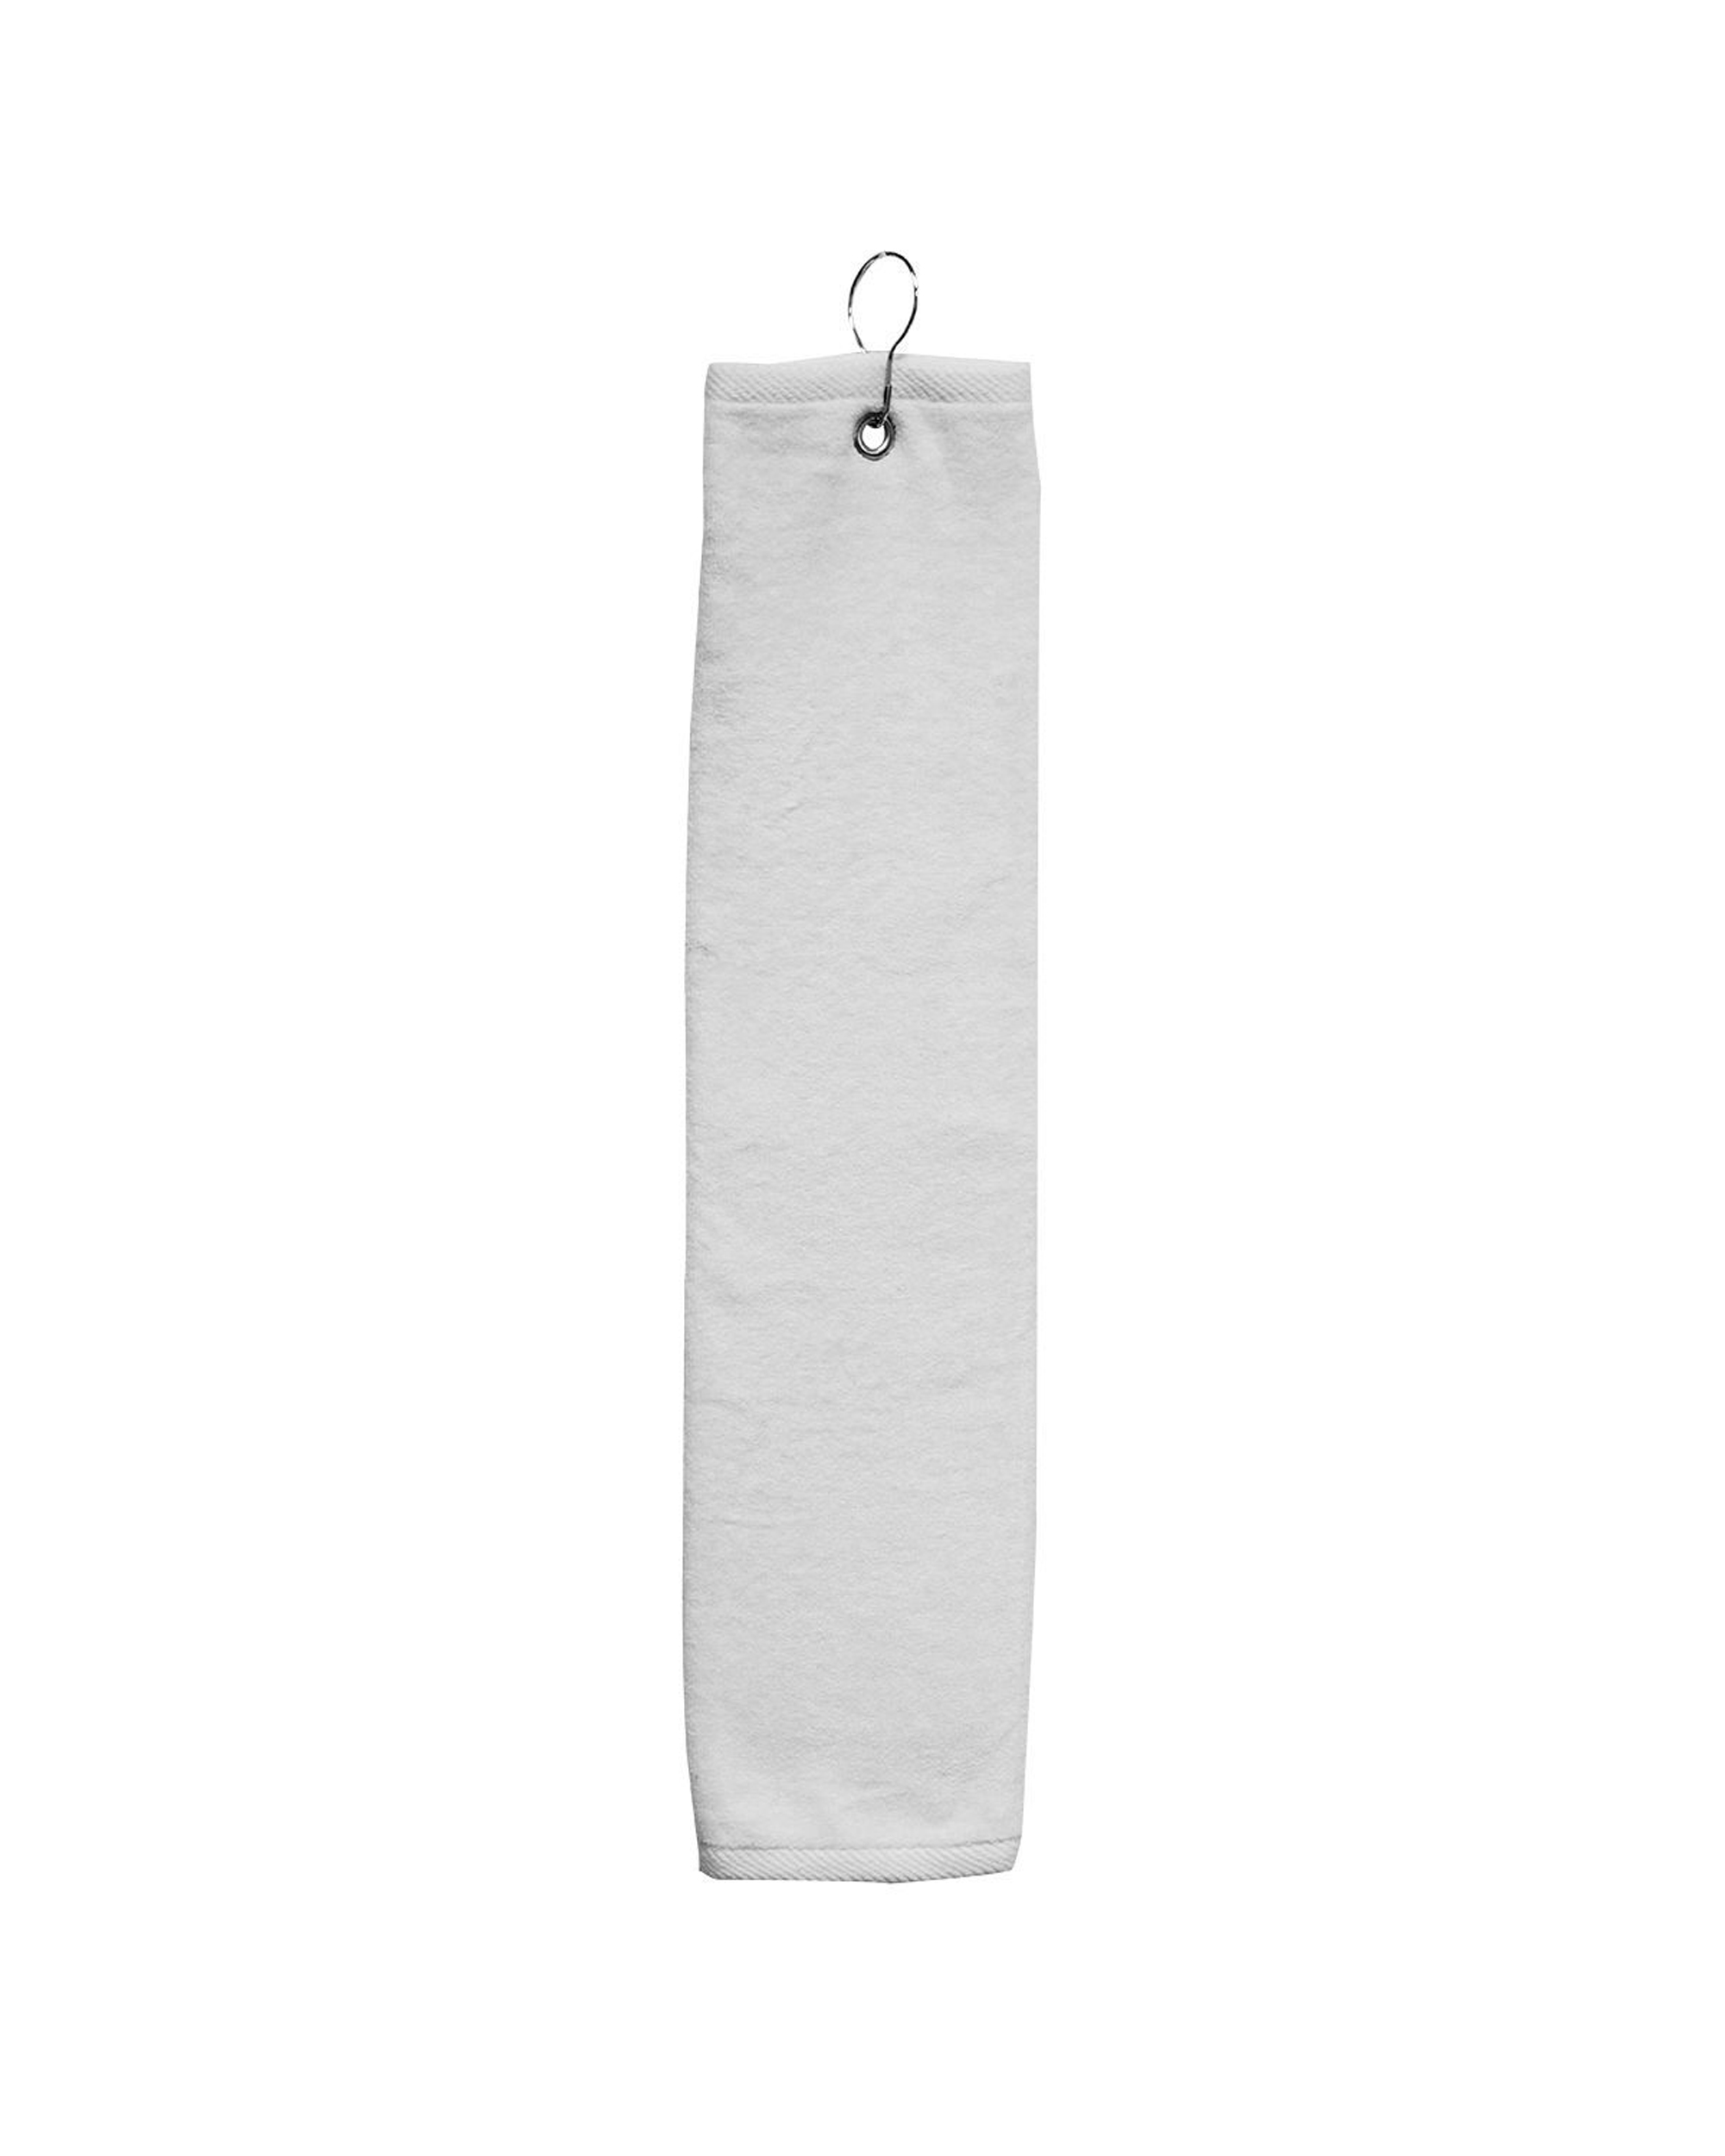 Carmel Towels C162523TGH Trifold Golf Towel with Grommet and Hook